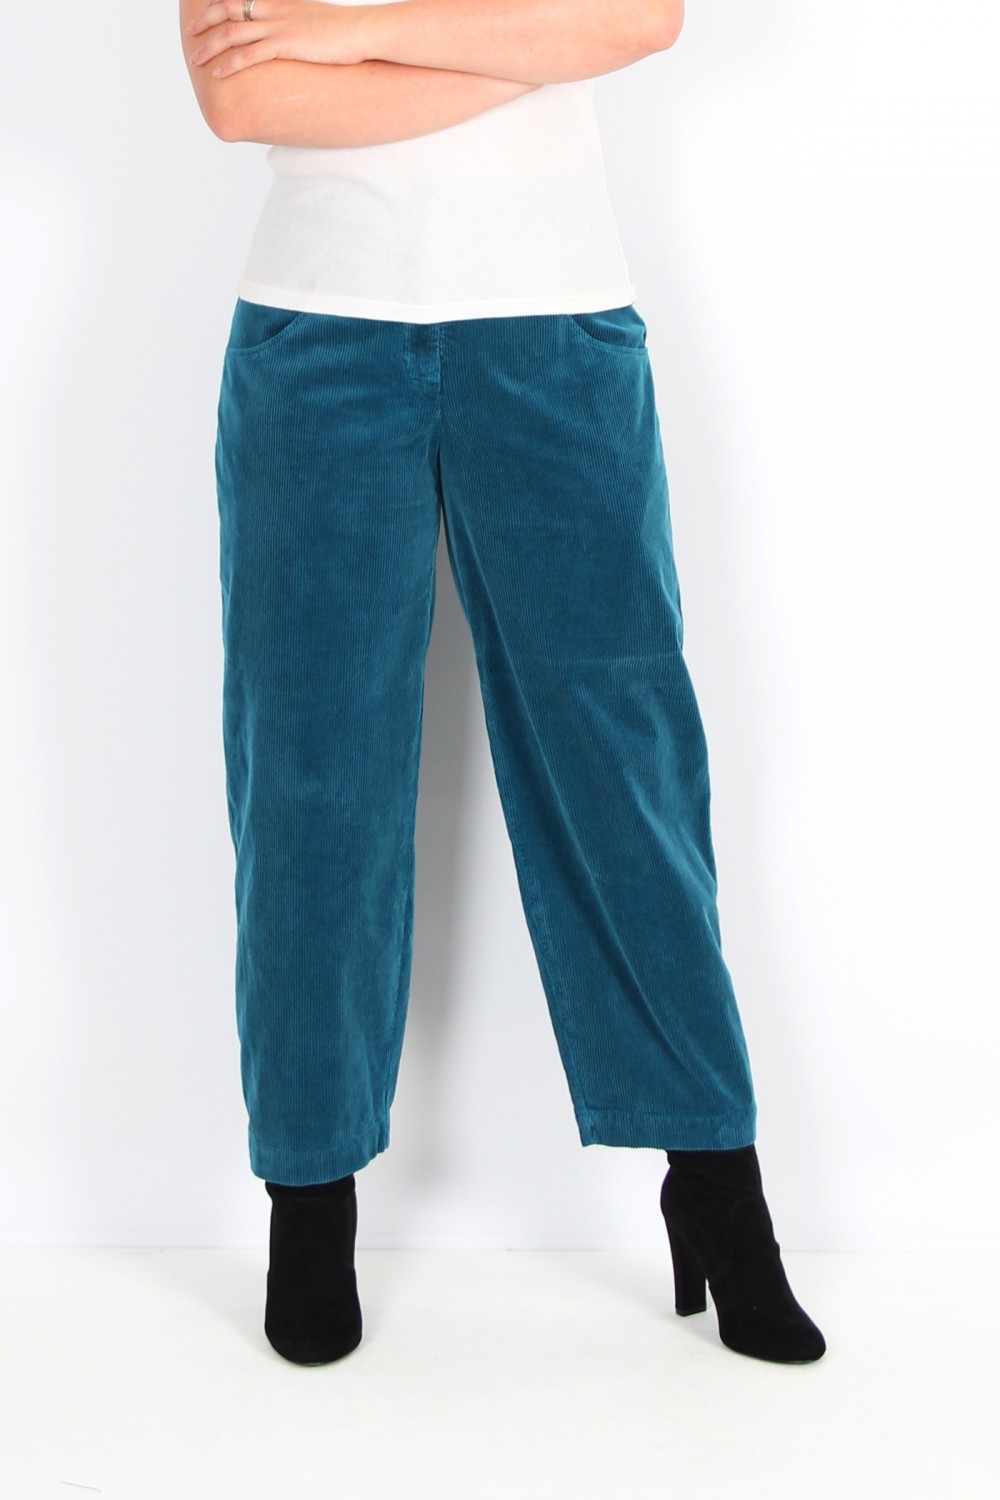 OSKA Trousers Kahren 314 Teal / Cotton Cord With Stretch Content